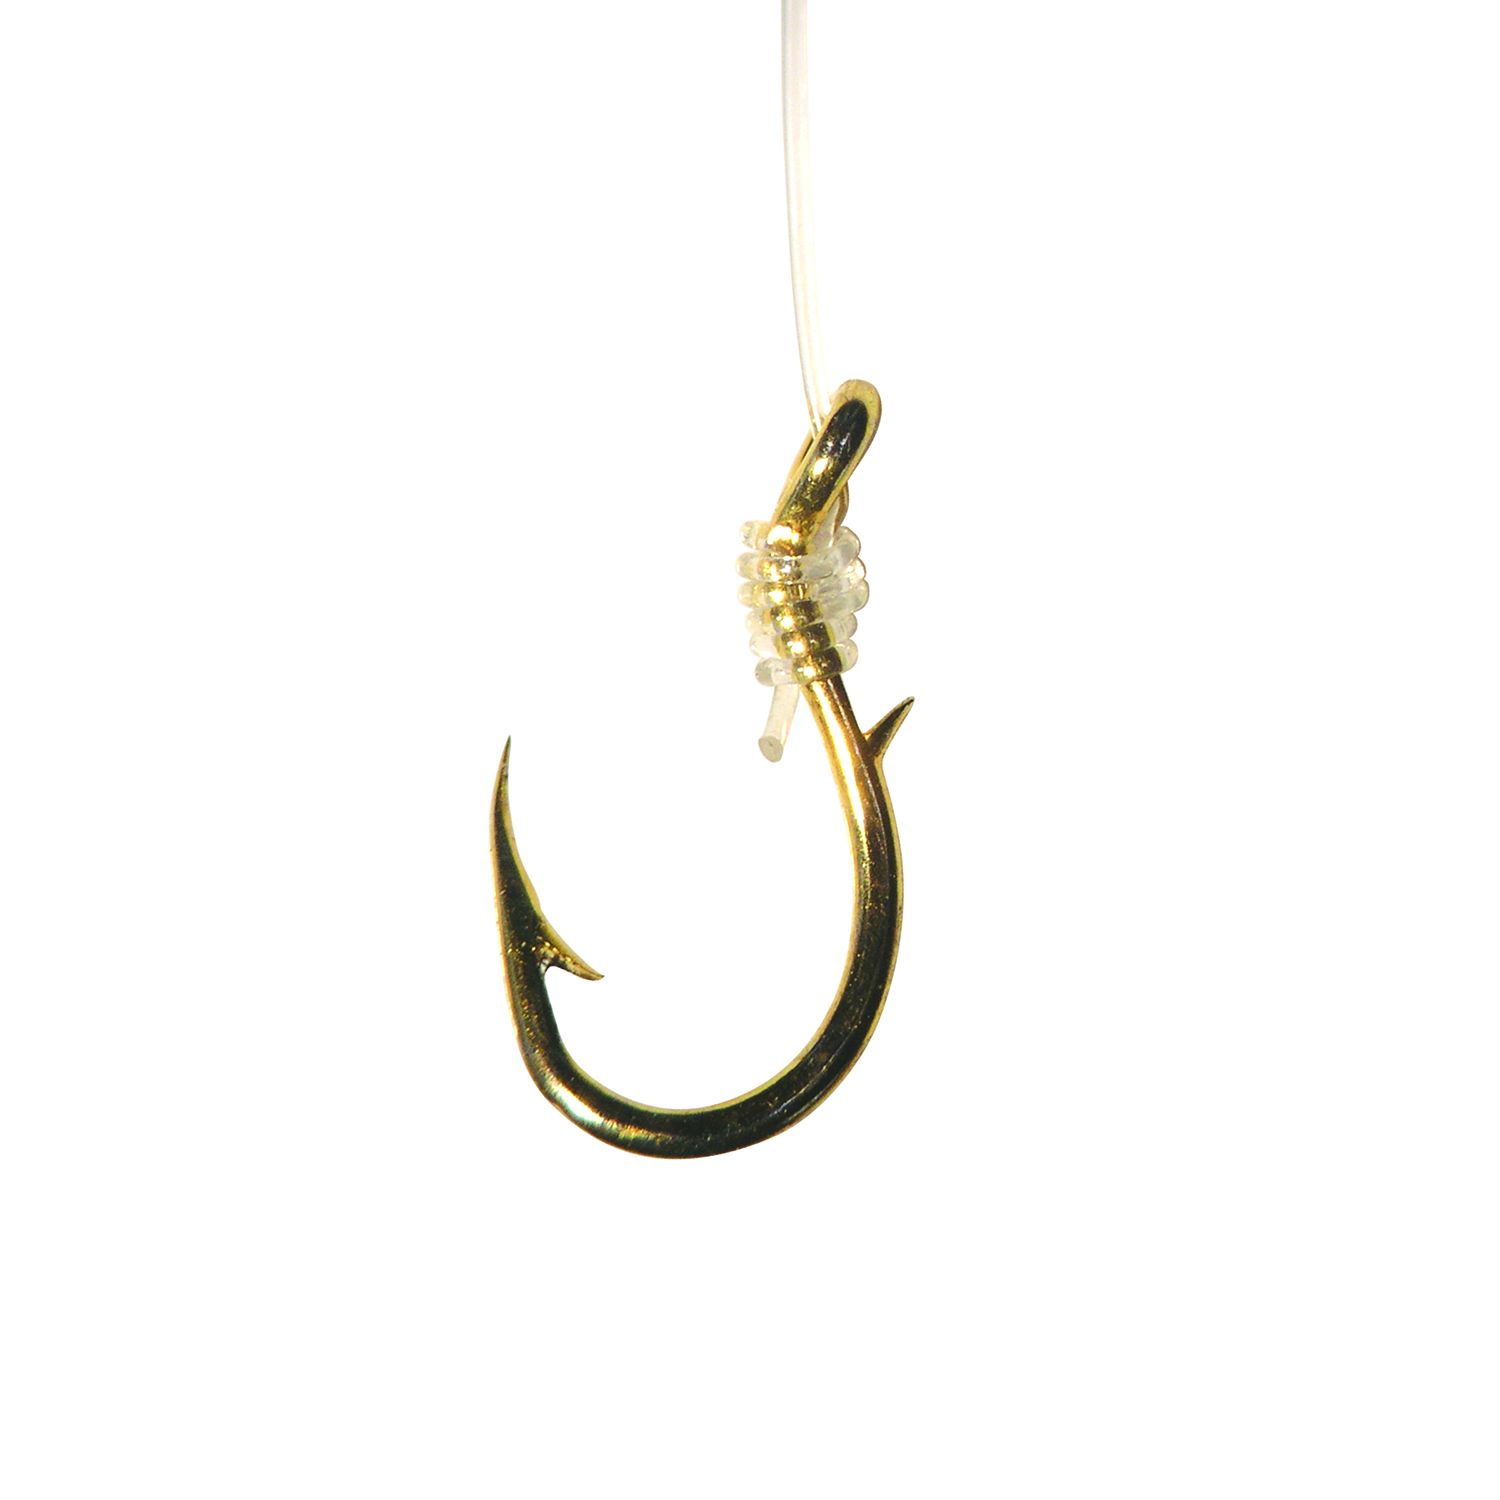 EAGLE CLAW FISHING HOOKS SALMON EGG, SZ 10 FREE SHIPPING 10 in